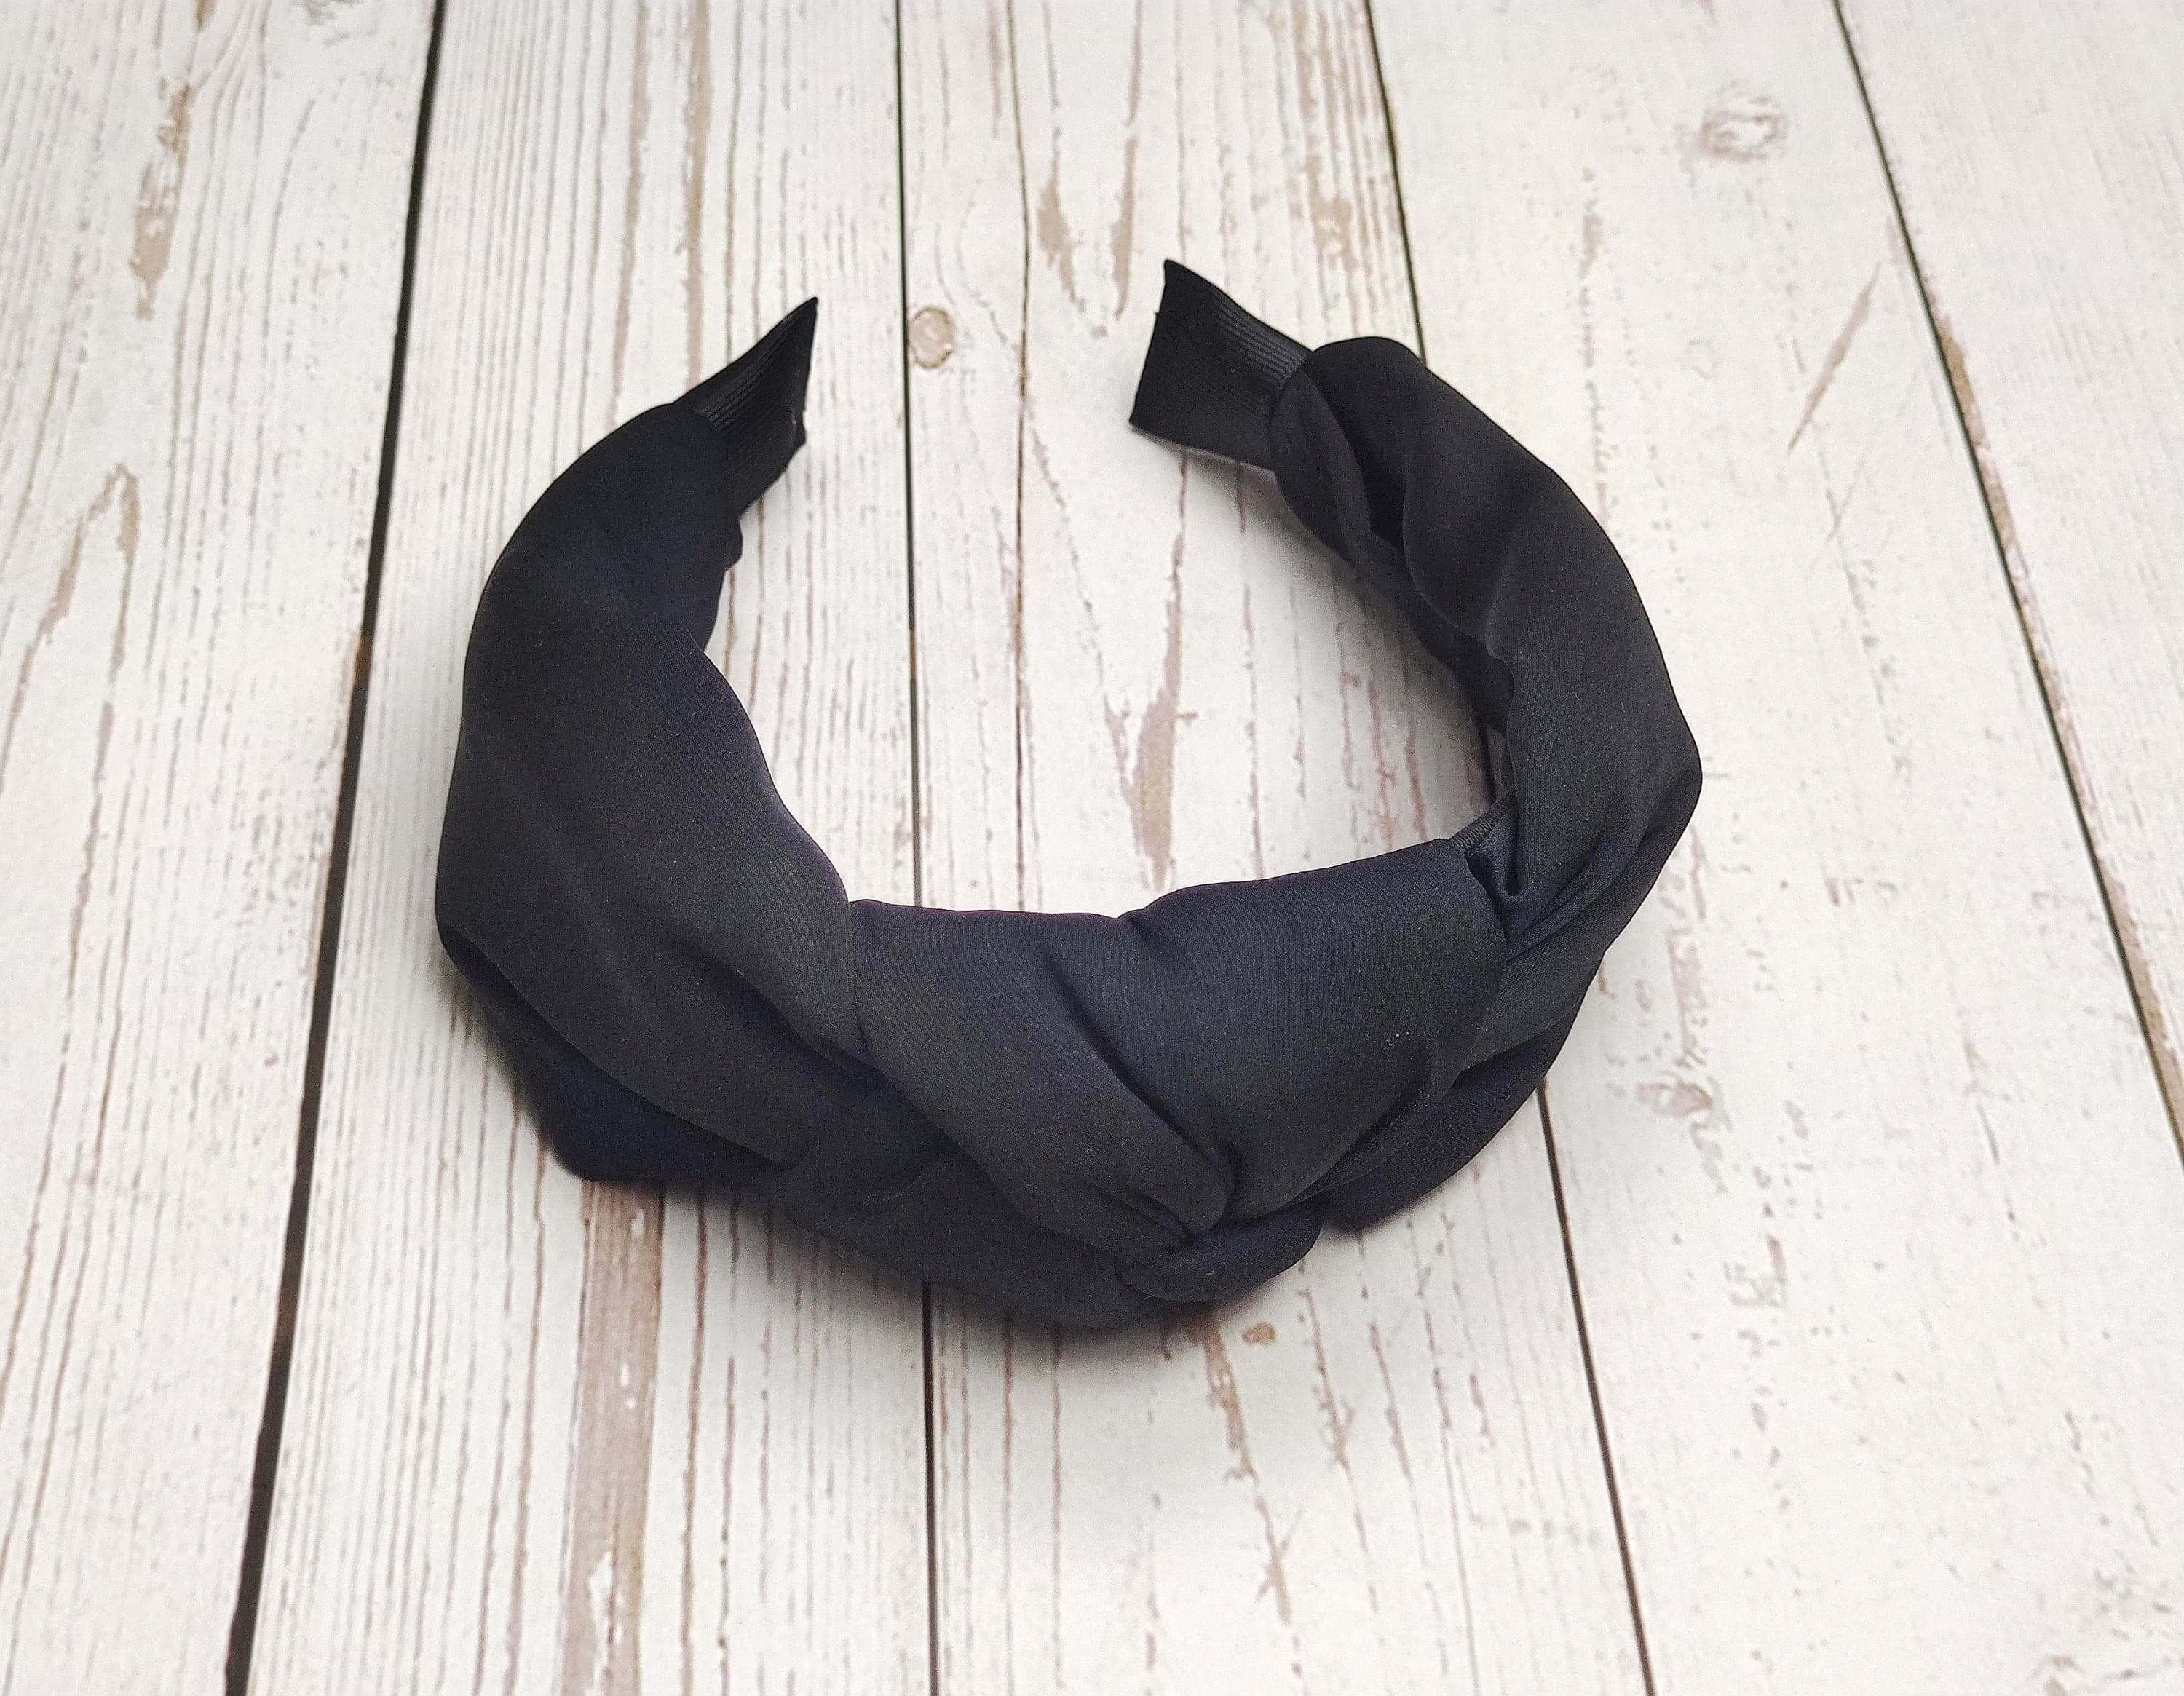 Give your look an extra boost with this fashionable Black Headband. It is made from high-quality materials and will keep your hair looking sleek and stylish all day long.